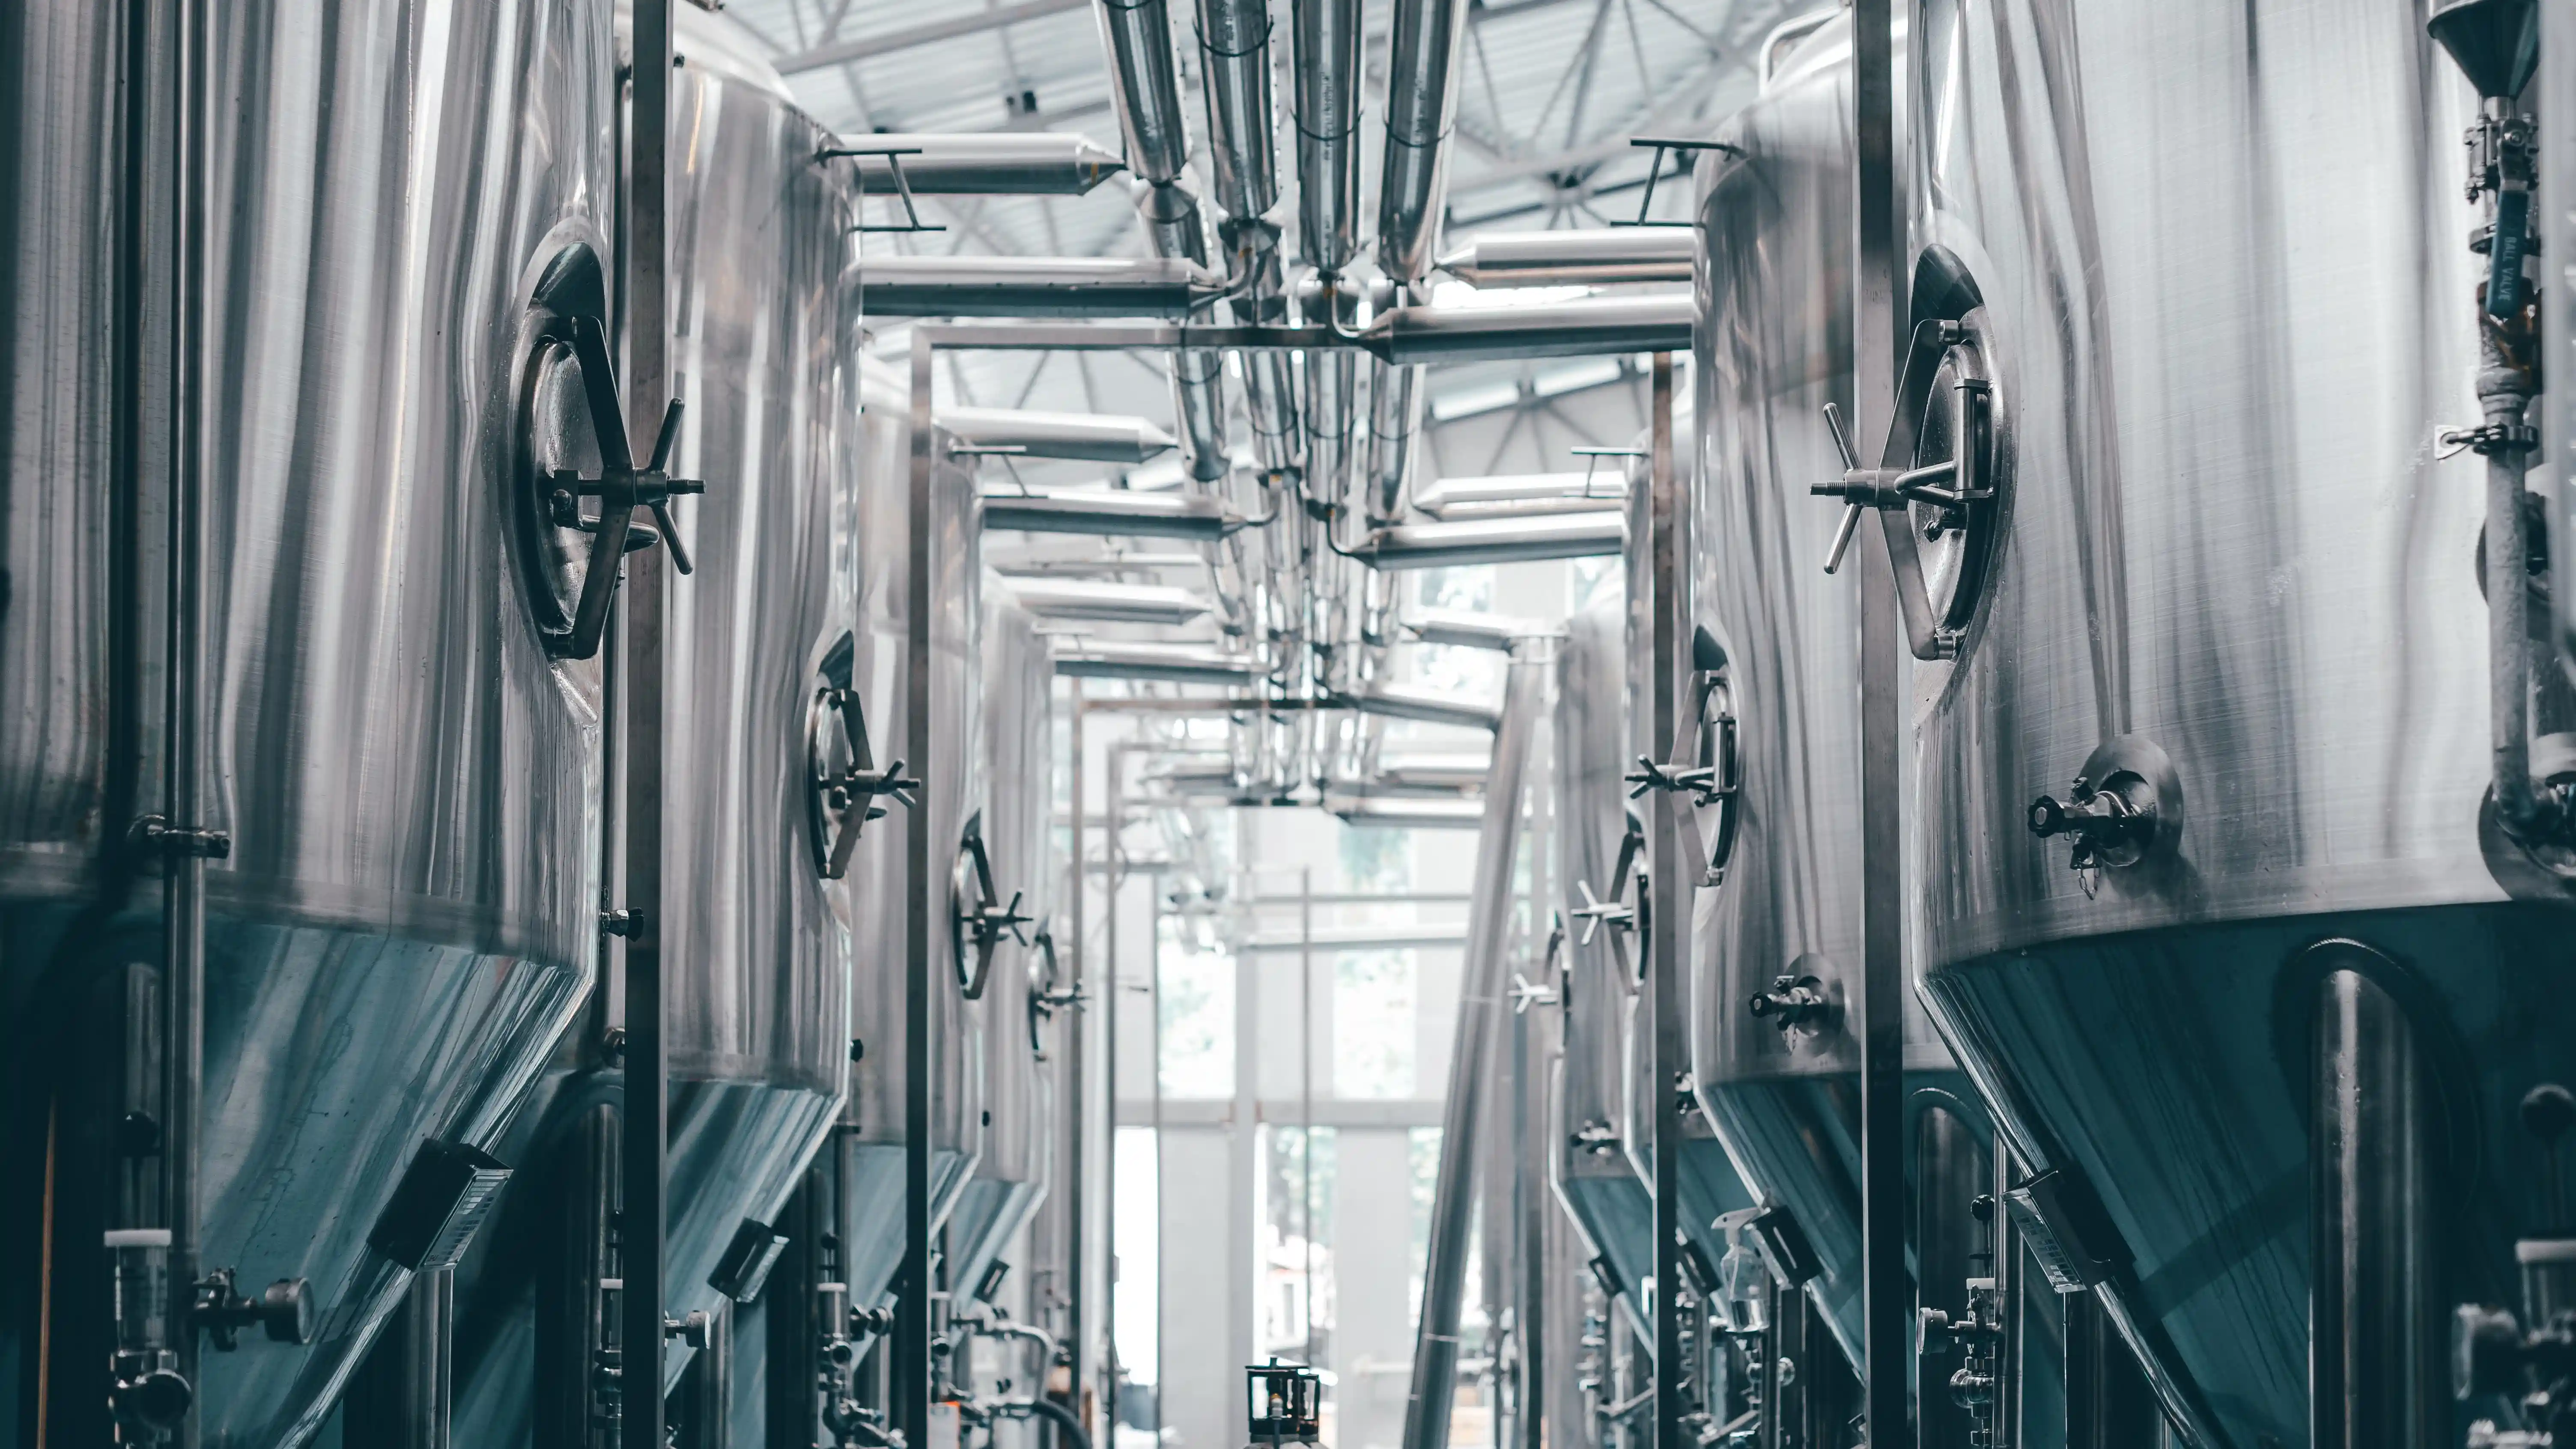 Brewery Tour by Maka Di